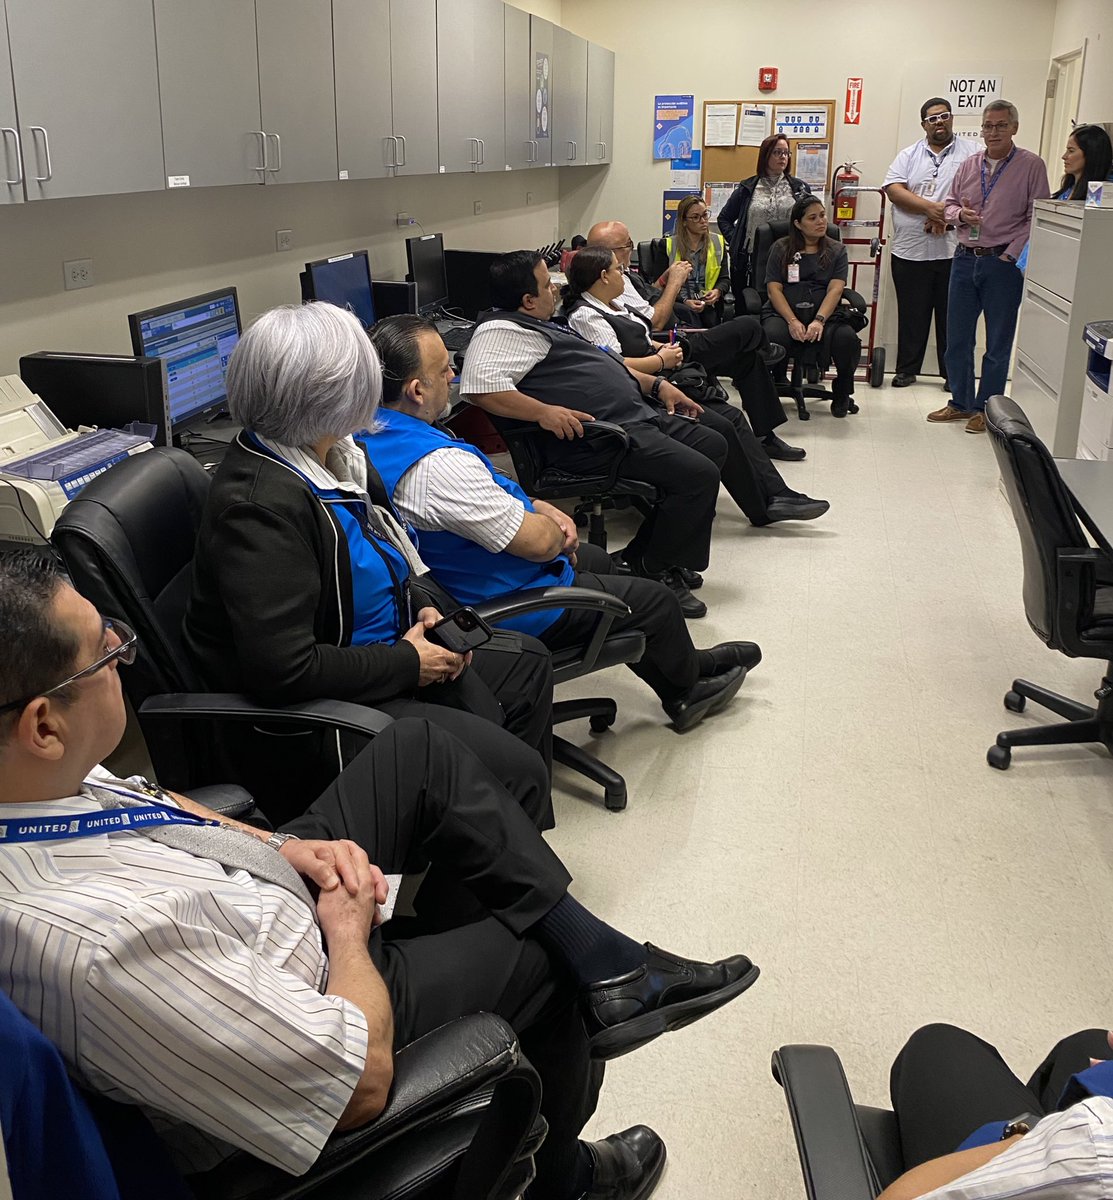 Our Regional Director engaging with #TeamSJU in this mornings briefing. ✈️ Getting ready for our high season. 🎄

#GoodLeadsTheWay
#beingunited

@weareunited @OJCordova1028 @Evecotto @secappanera @MannyPrieto3 @DJKinzelman